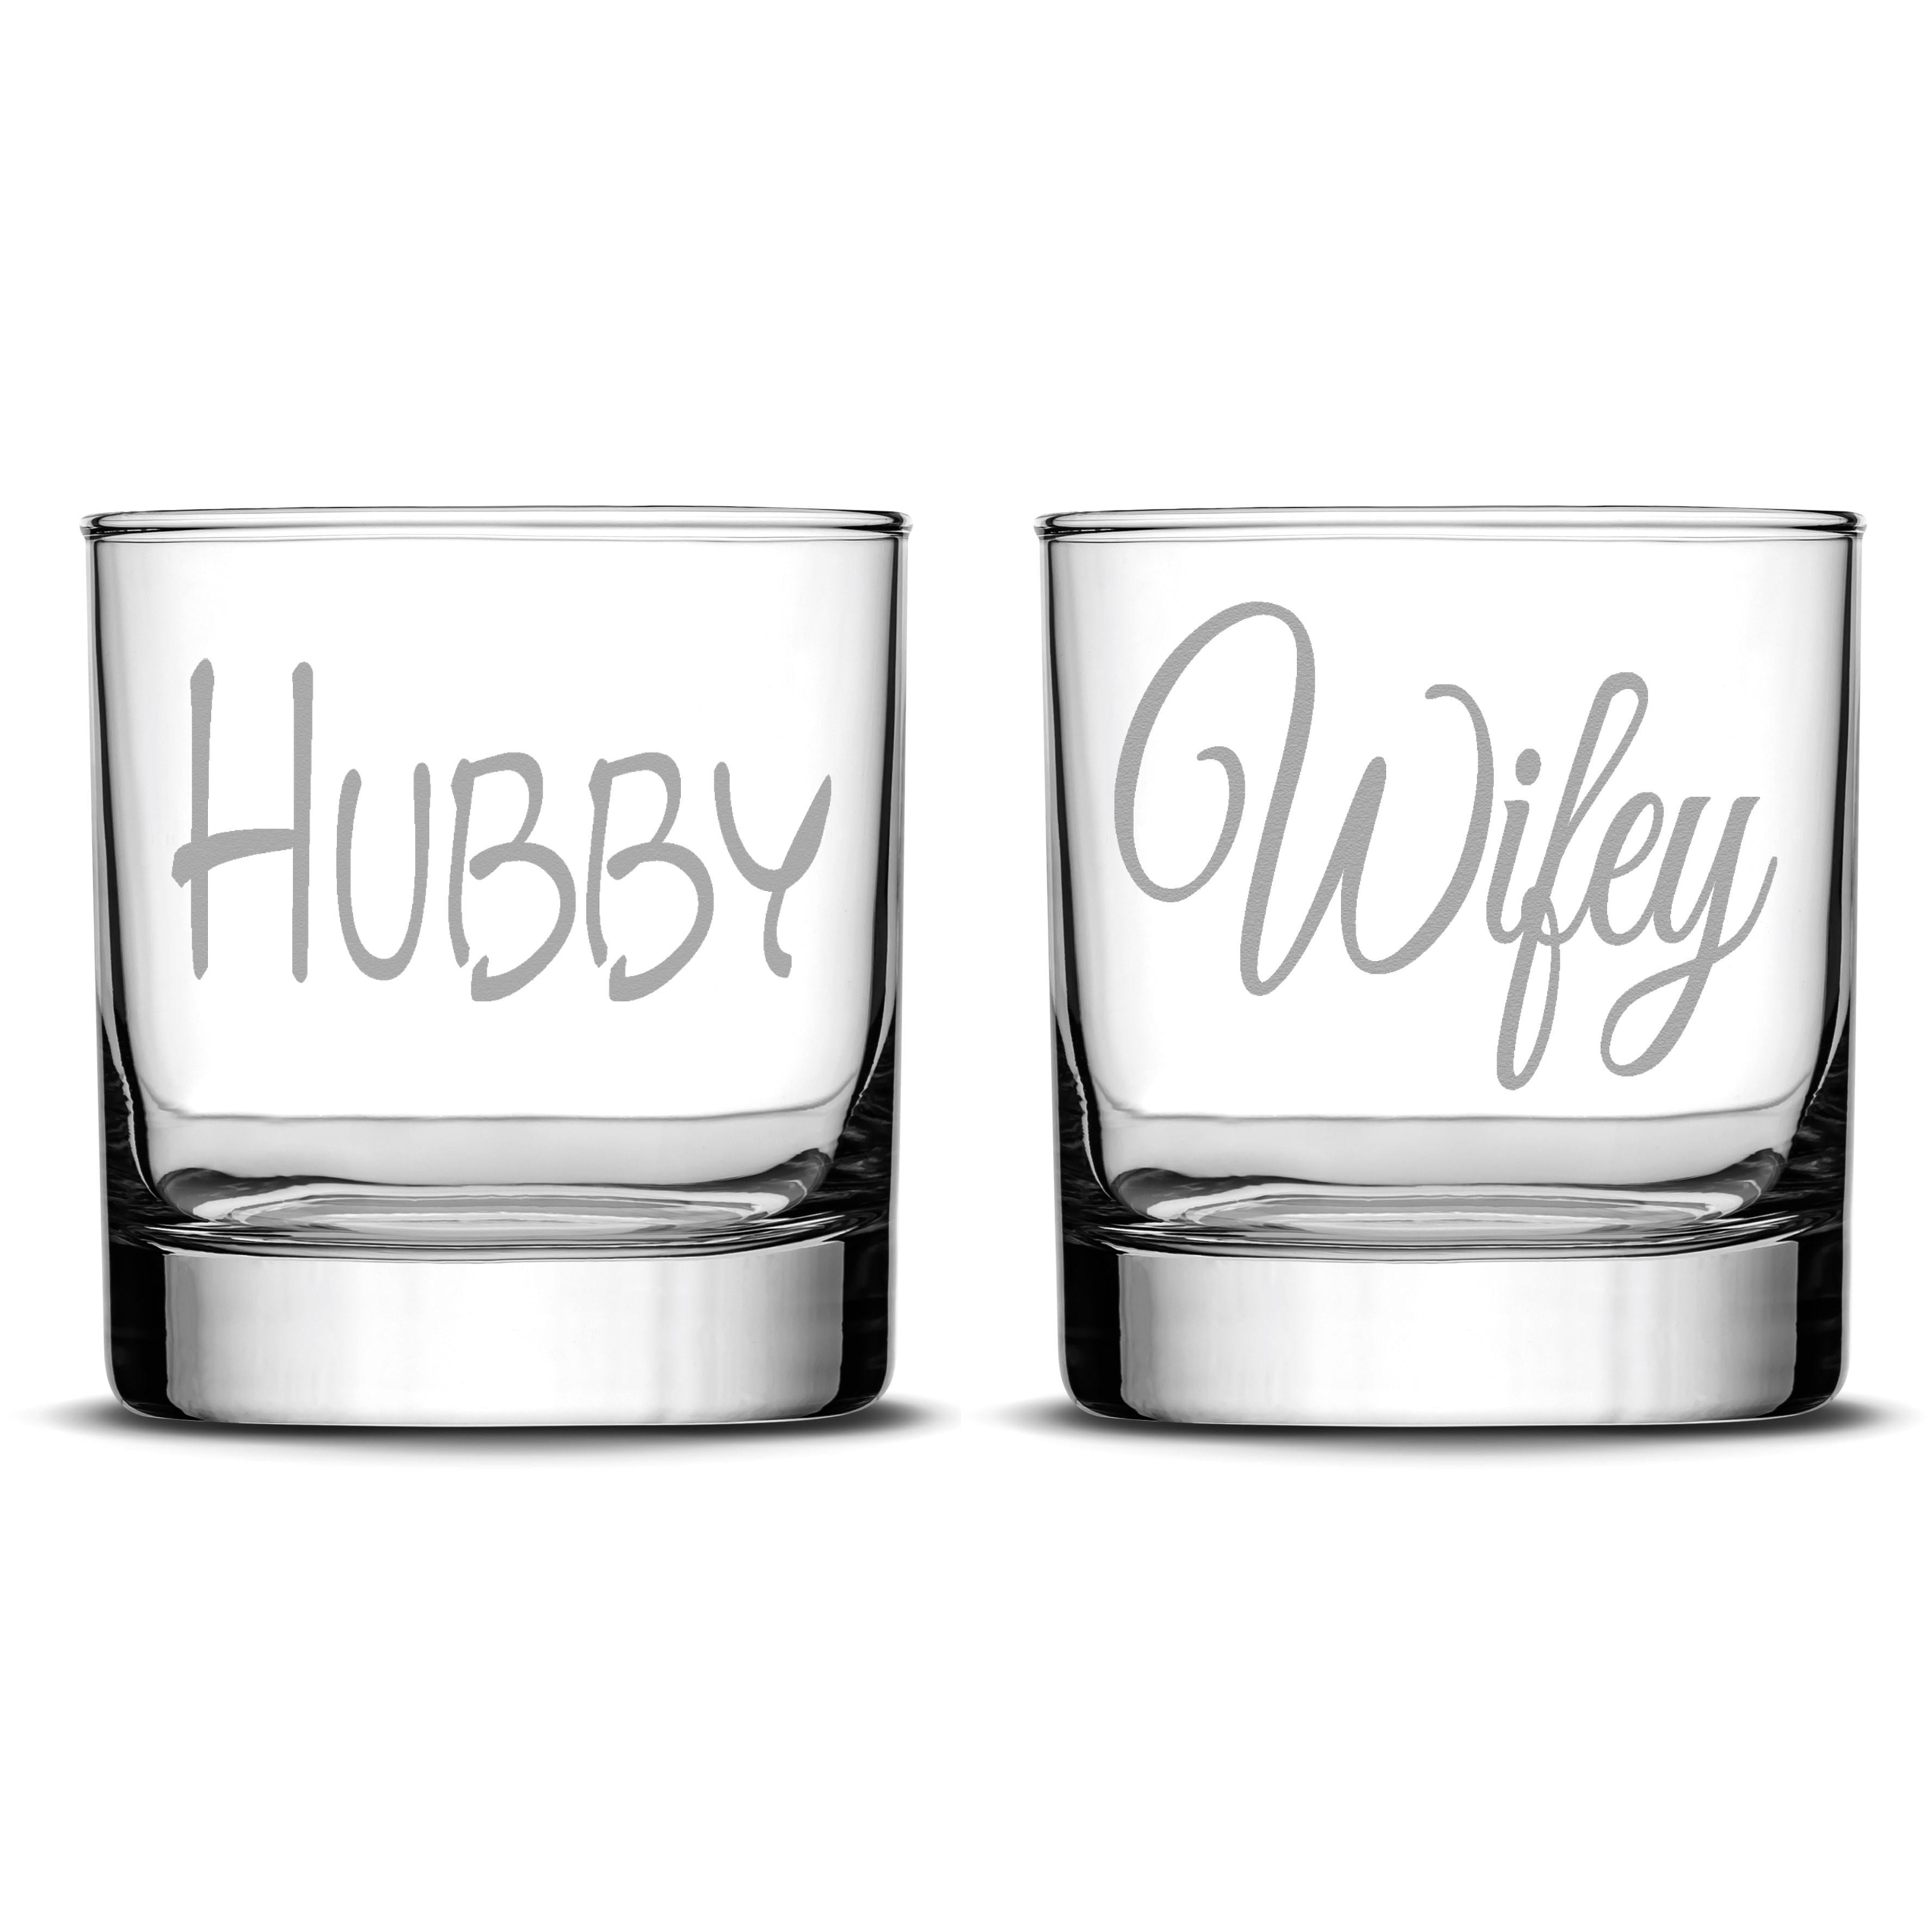 https://integritybottles.com/cdn/shop/products/premium-whiskey-glasses-hubby-and-wifey-hand-etched-10oz-rocks-glasses-made-in-usa-highball-gifts-set-of-2-sand-carved-integrity-bottles-23811866305_5000x.jpg?v=1571303299